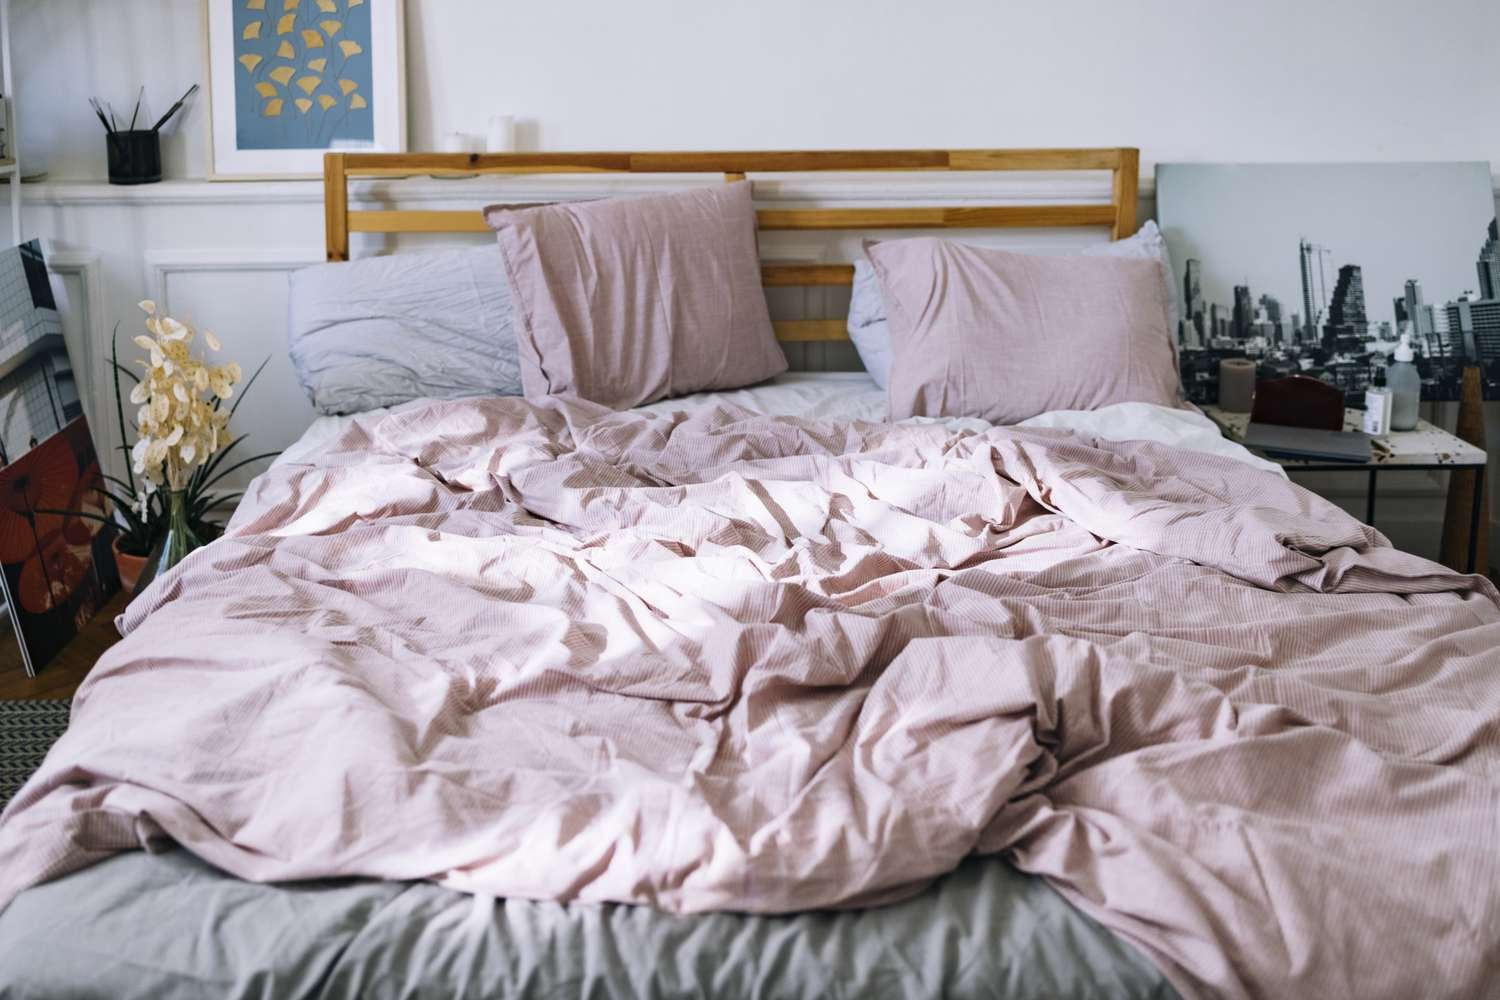 The Icky Reason You Shouldn’t Make Your Bed As Soon As You Wake Up